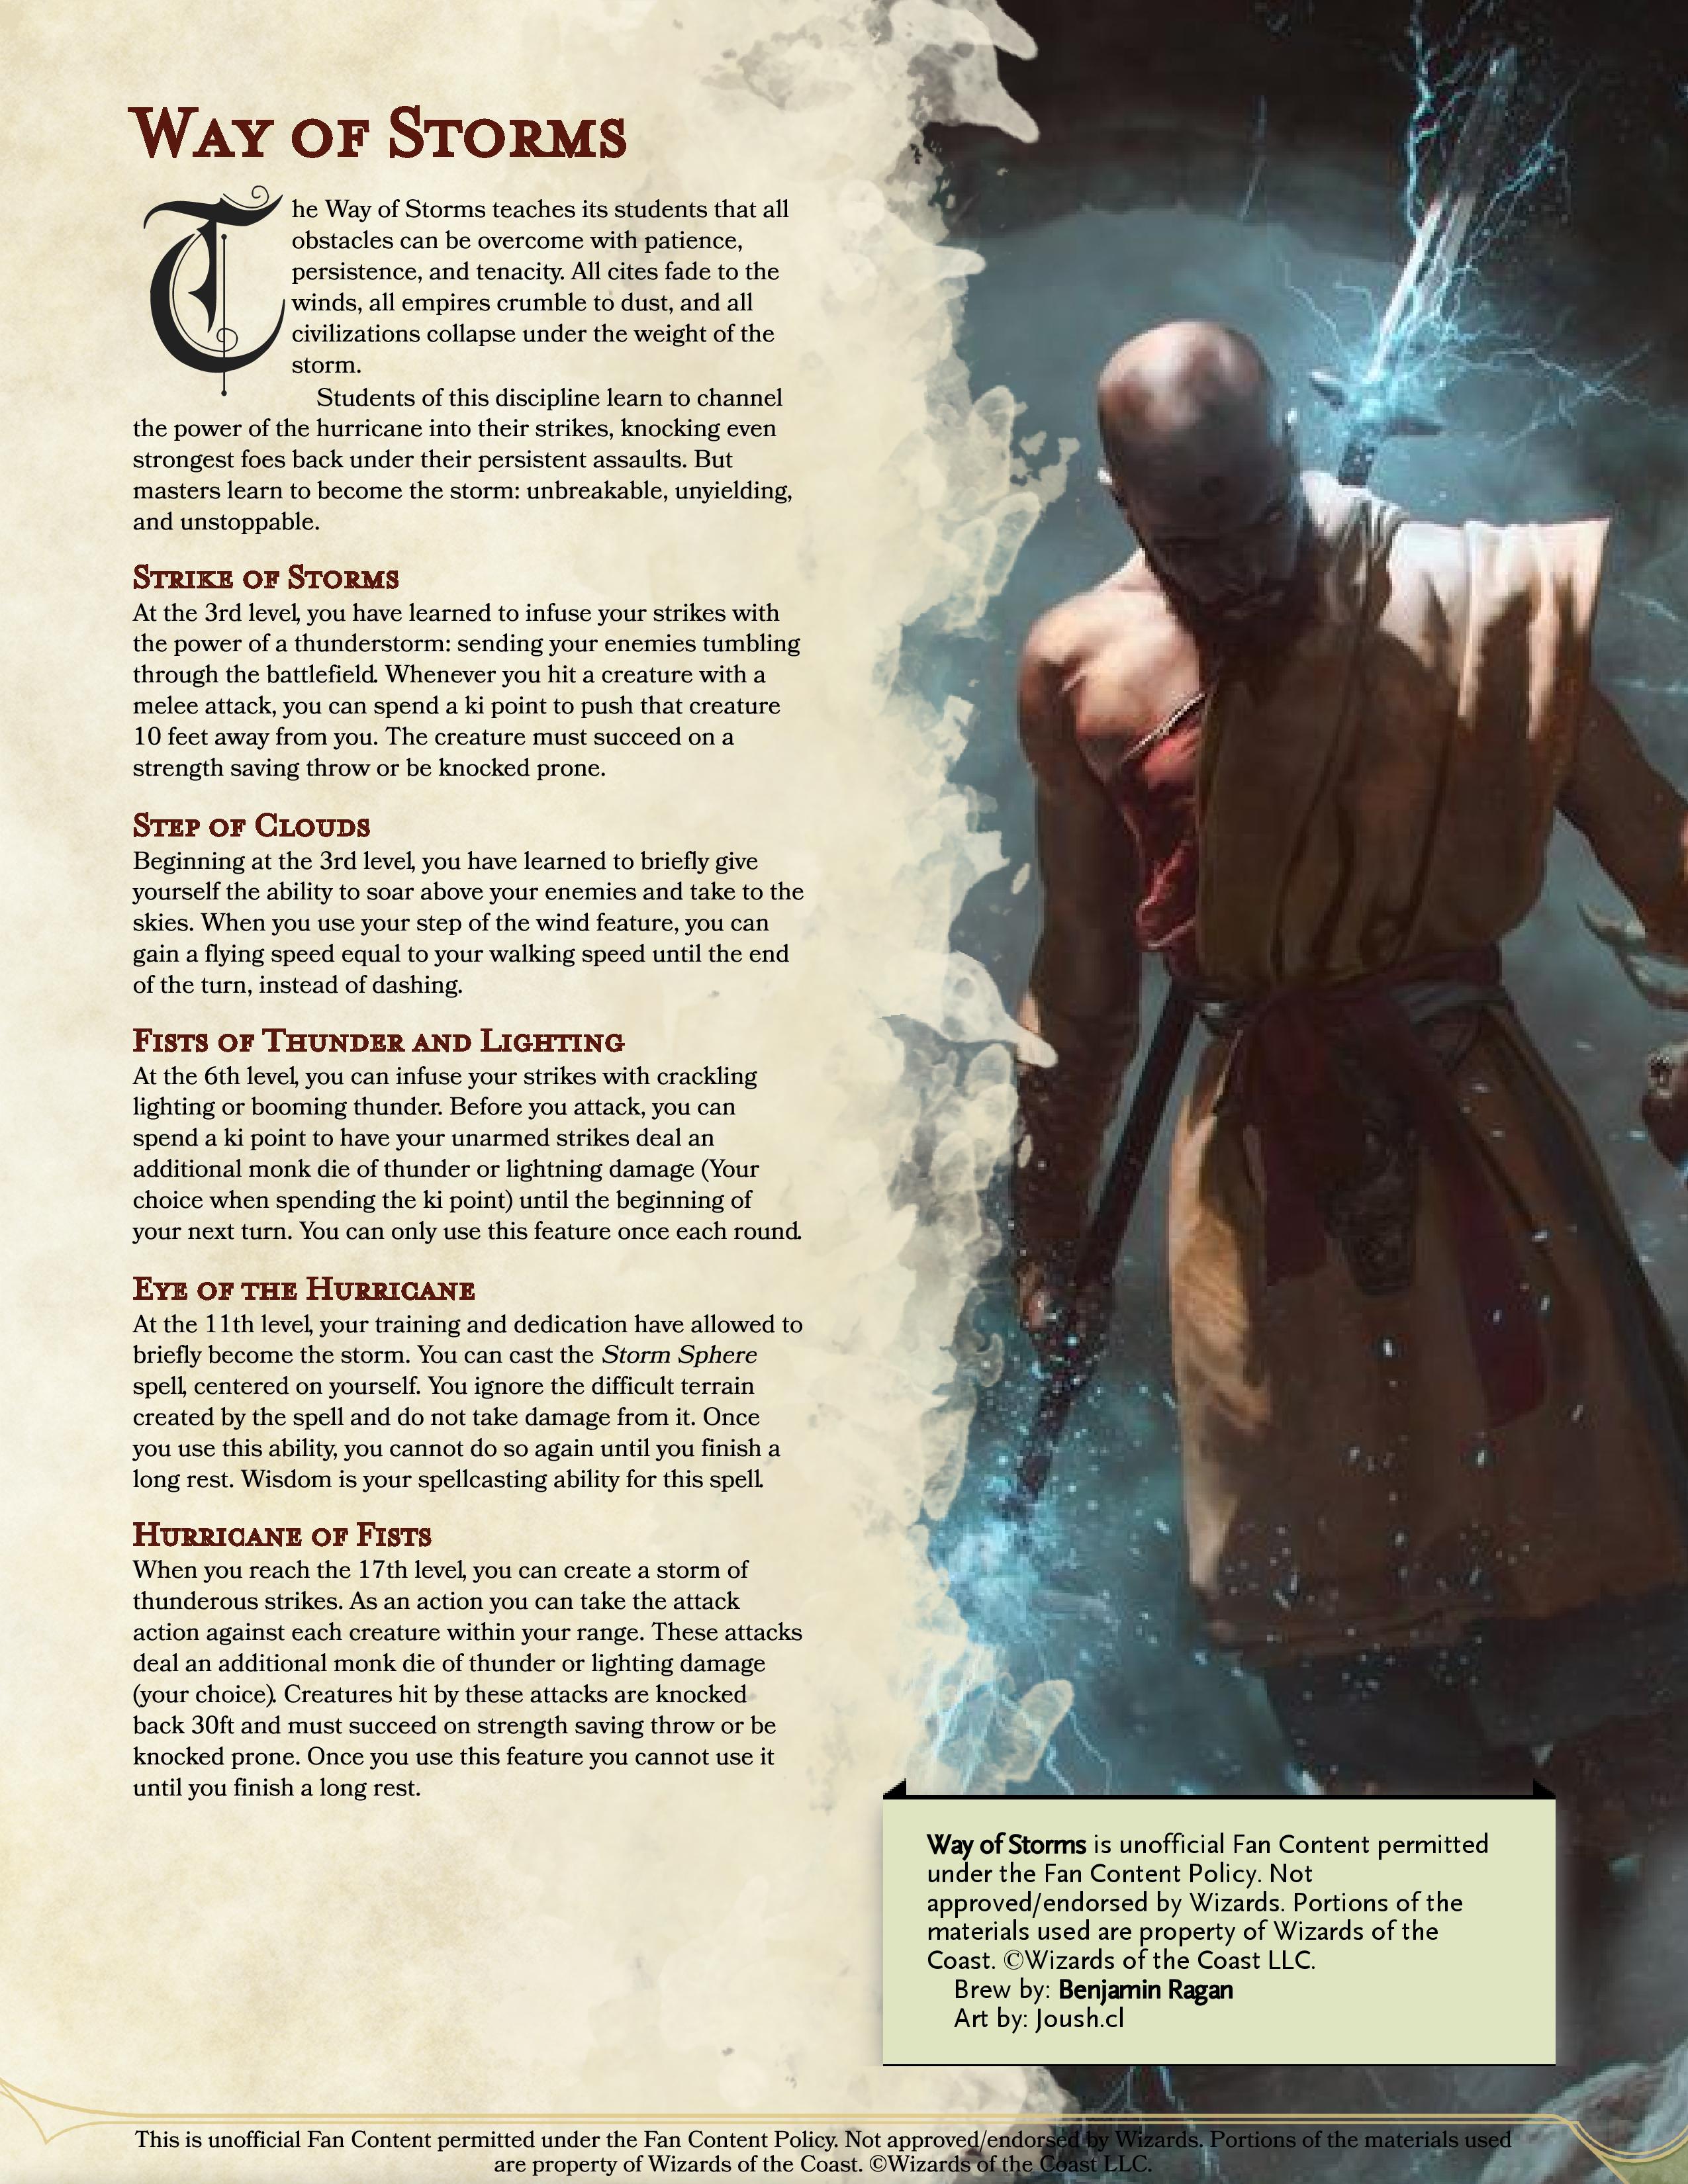 GmBen on Twitter: "I've got two awesome subclasses to share with y'all today! 1) The Mist Walker: Vanish into mists and surprise your enemies when you join this conclave 2) The